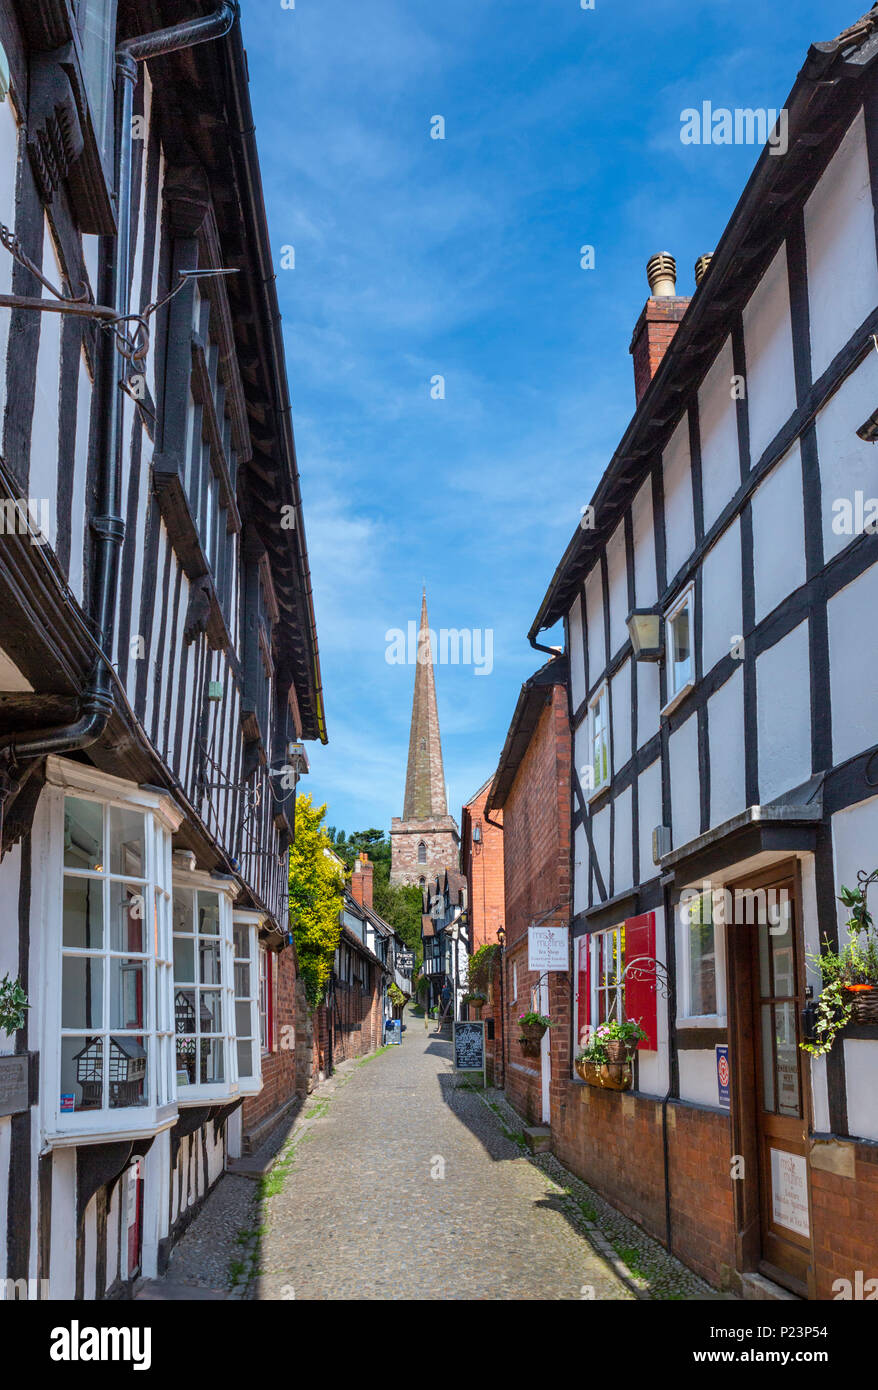 Traditional cobbled street in the old town, Church Lane, Ledbury, Herefordshire, England, UK Stock Photo